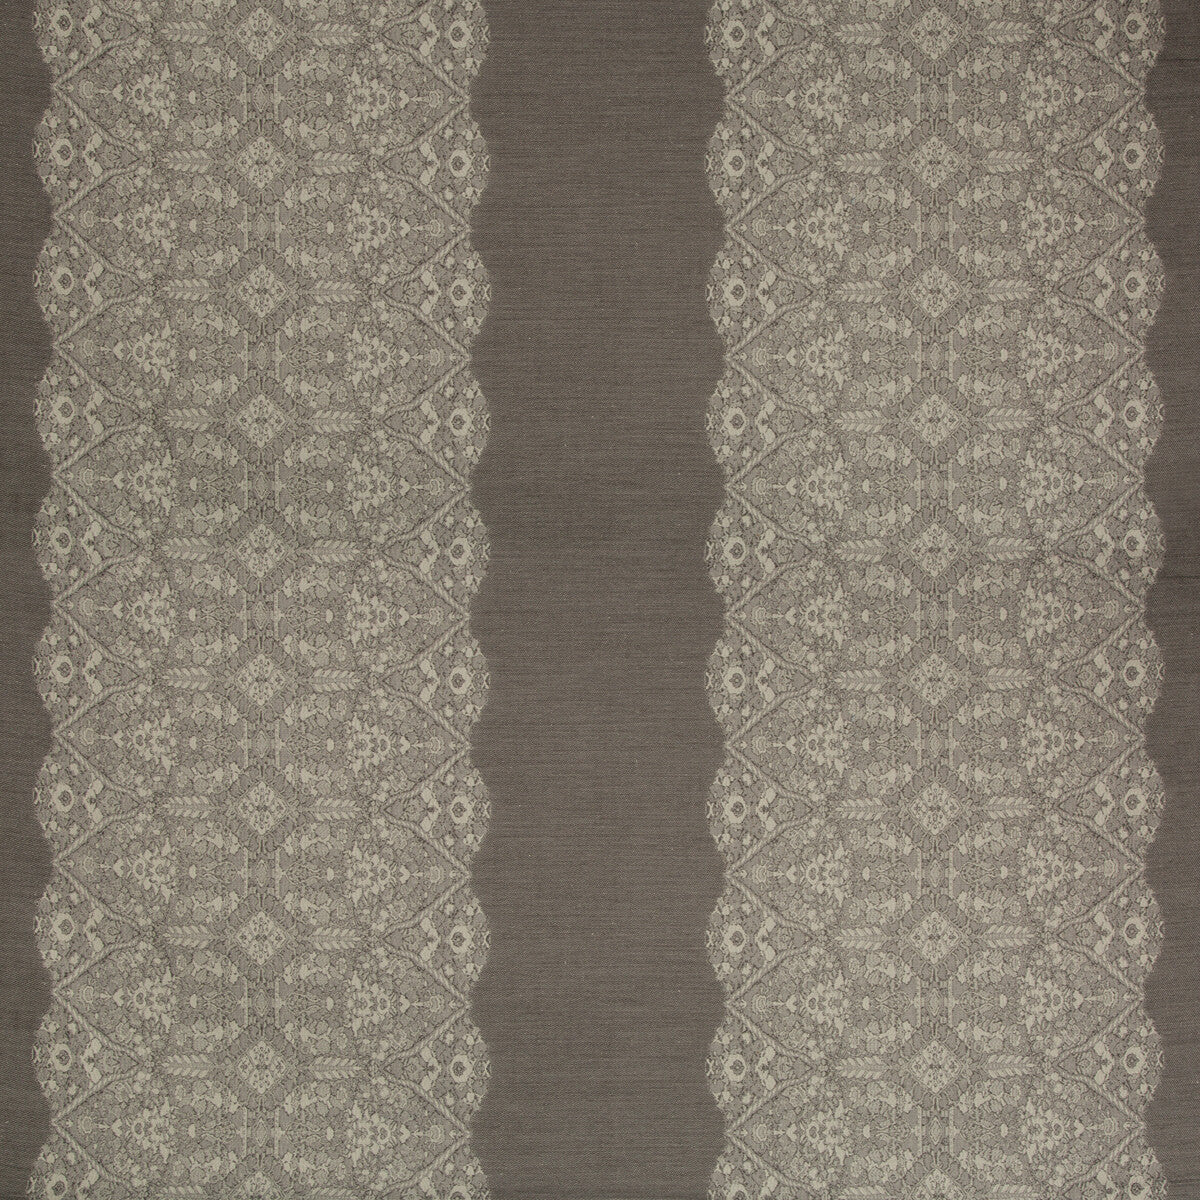 Garrick Paisley fabric in sable color - pattern 4554.21.0 - by Kravet Couture in the David Phoenix Well-Suited collection